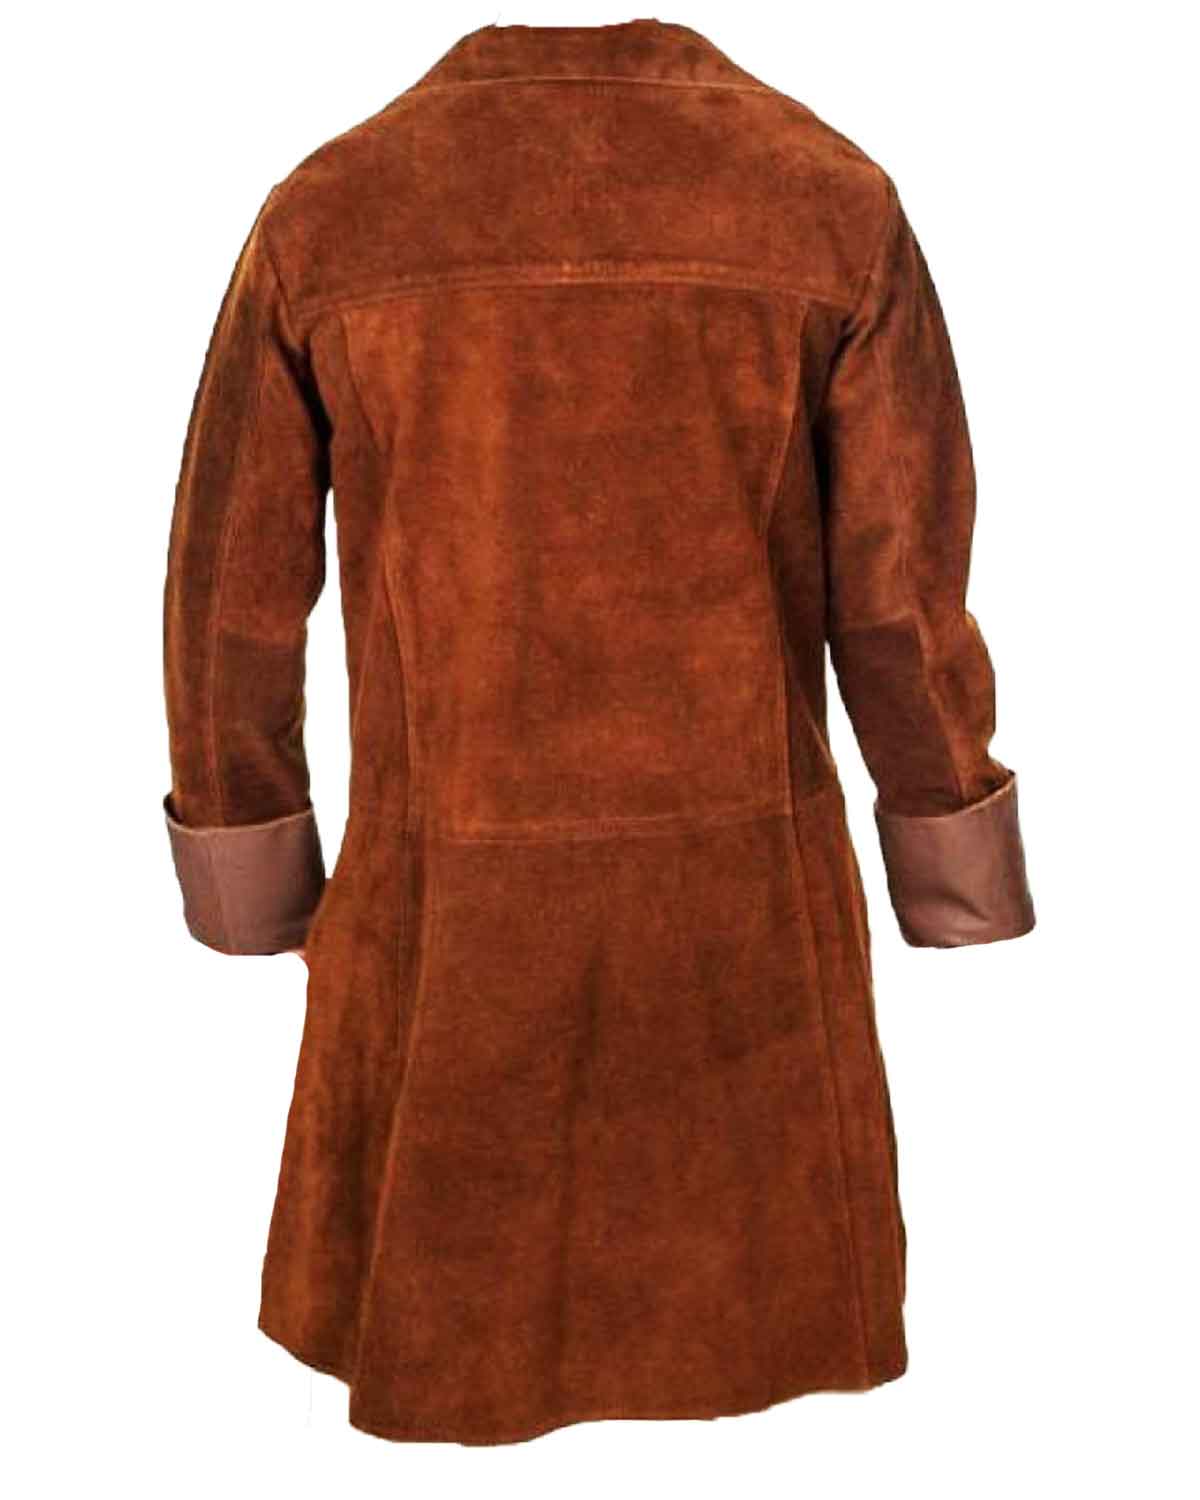 Firefly Malcolm Reynolds Suede Brown Leather Coat 